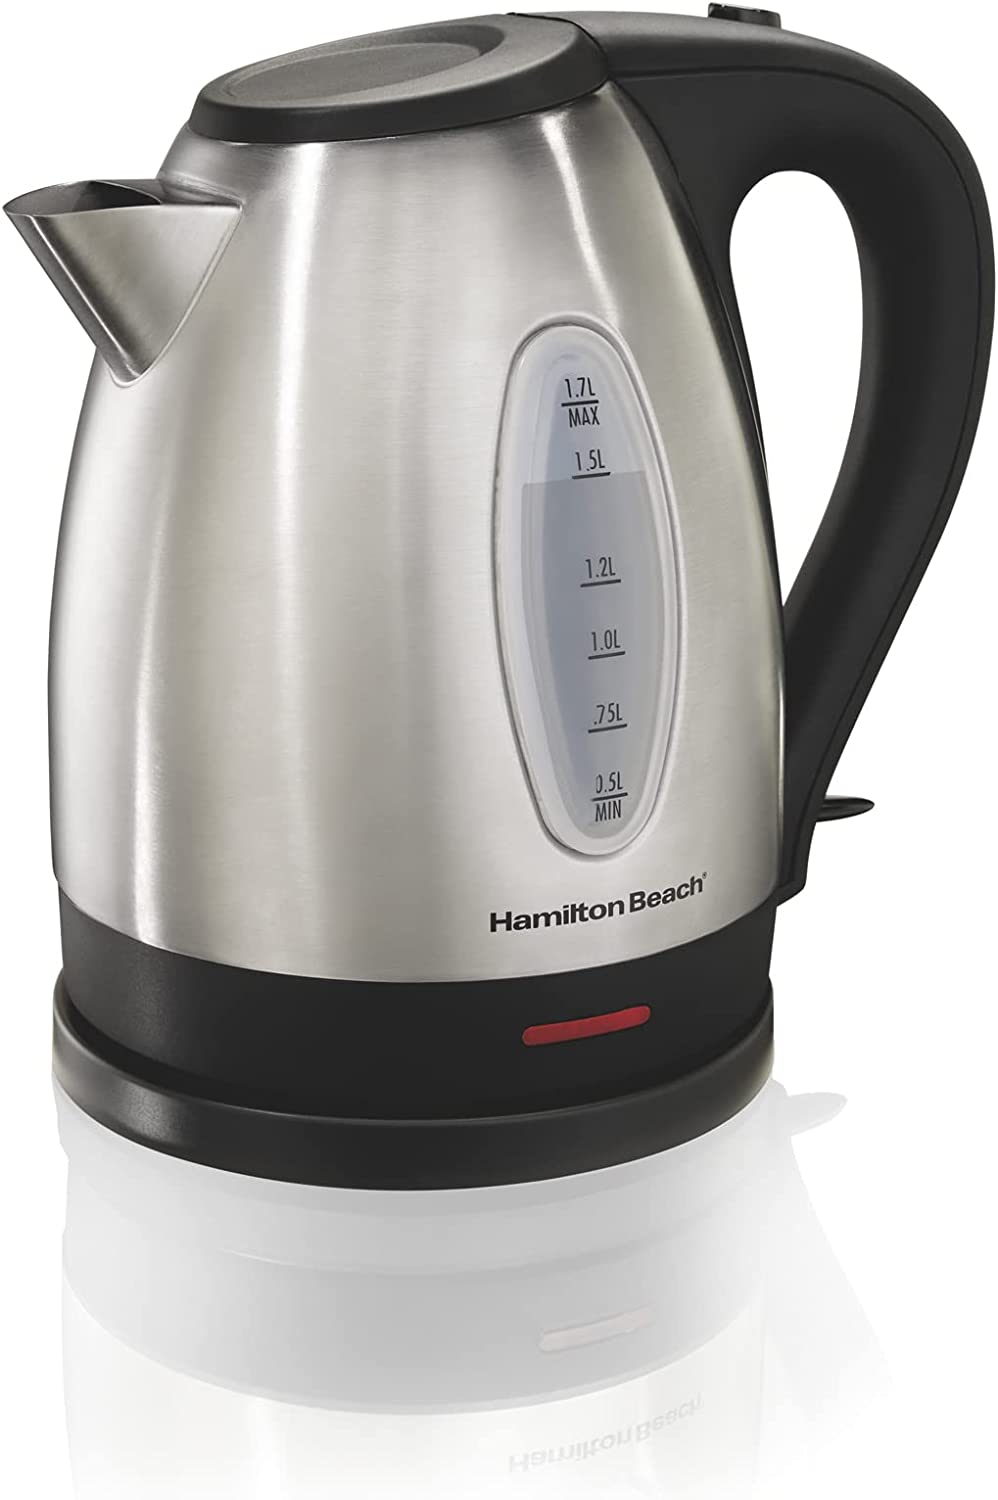 1.7L One-Touch Electric Tea Kettle Water Boiler Automatic Shut-Off Fast  Boiling